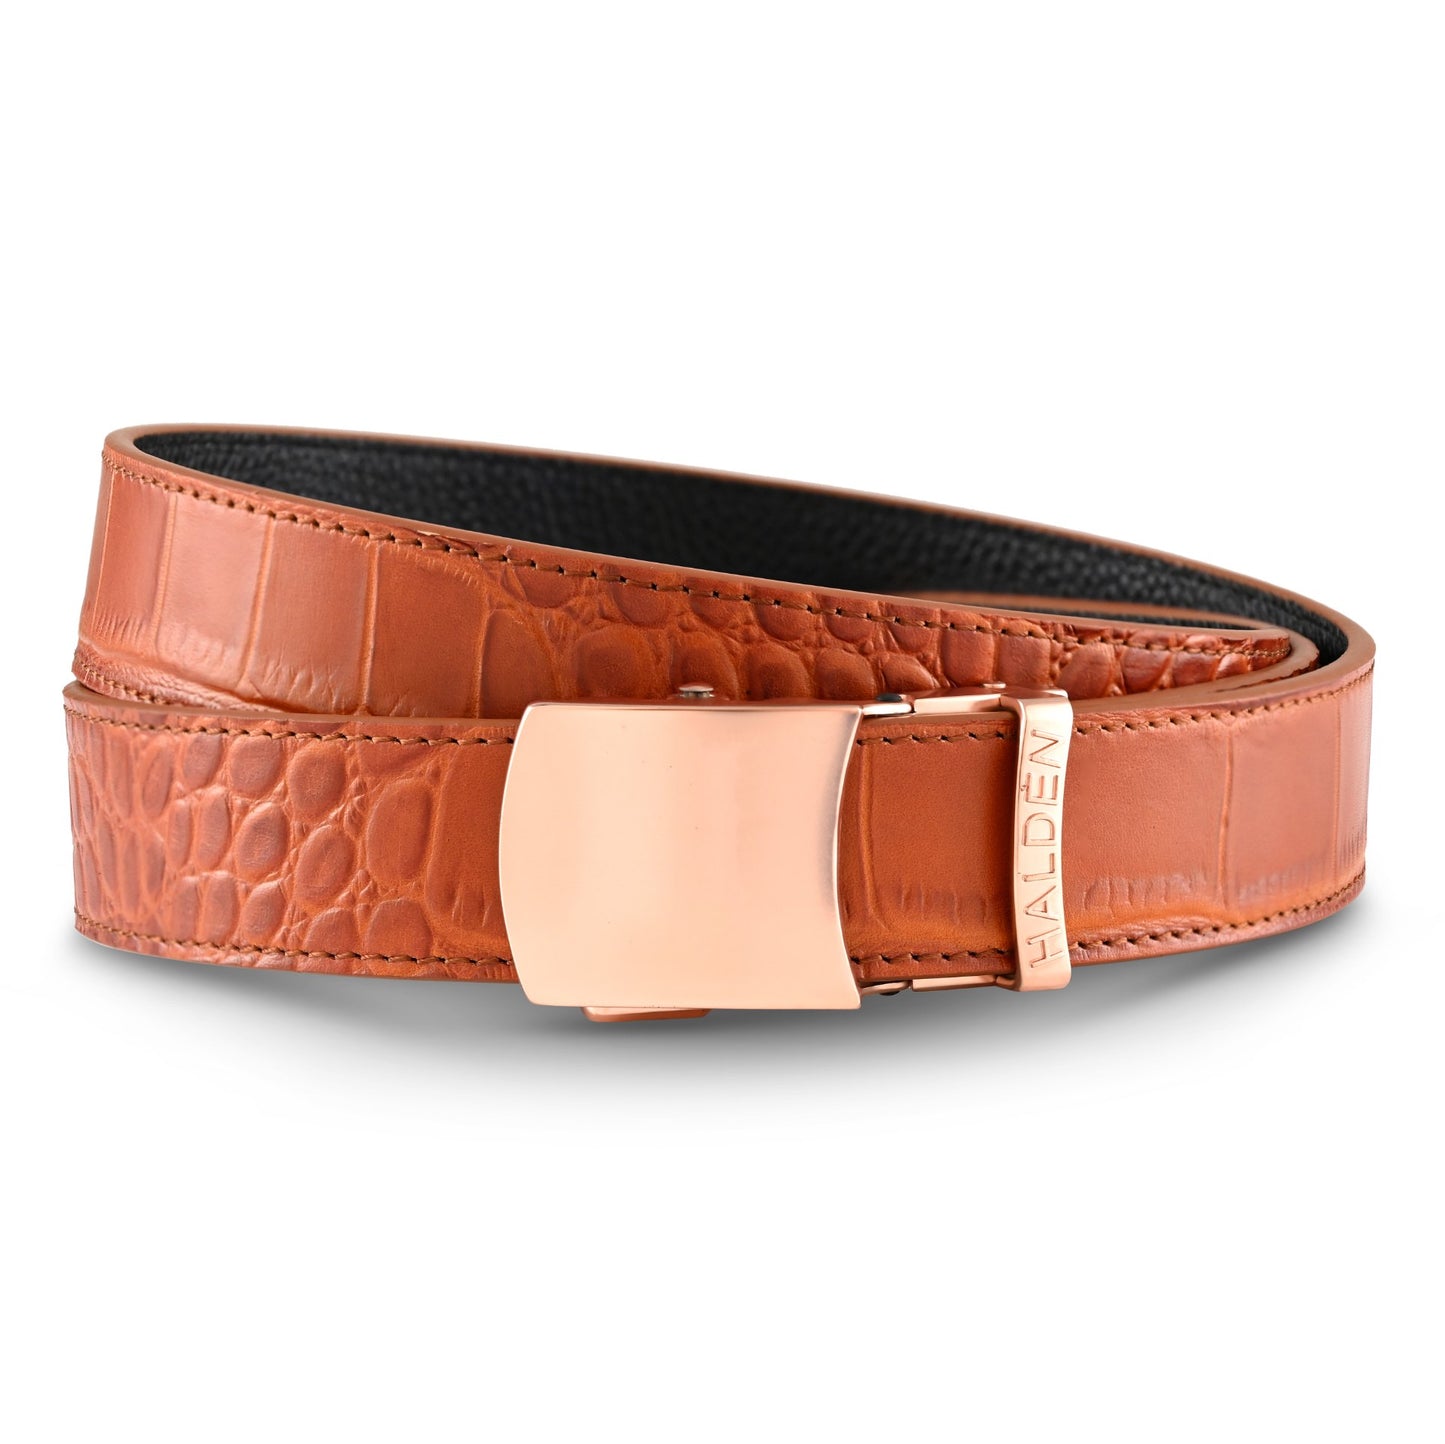 Daven Tan with vintage buckle